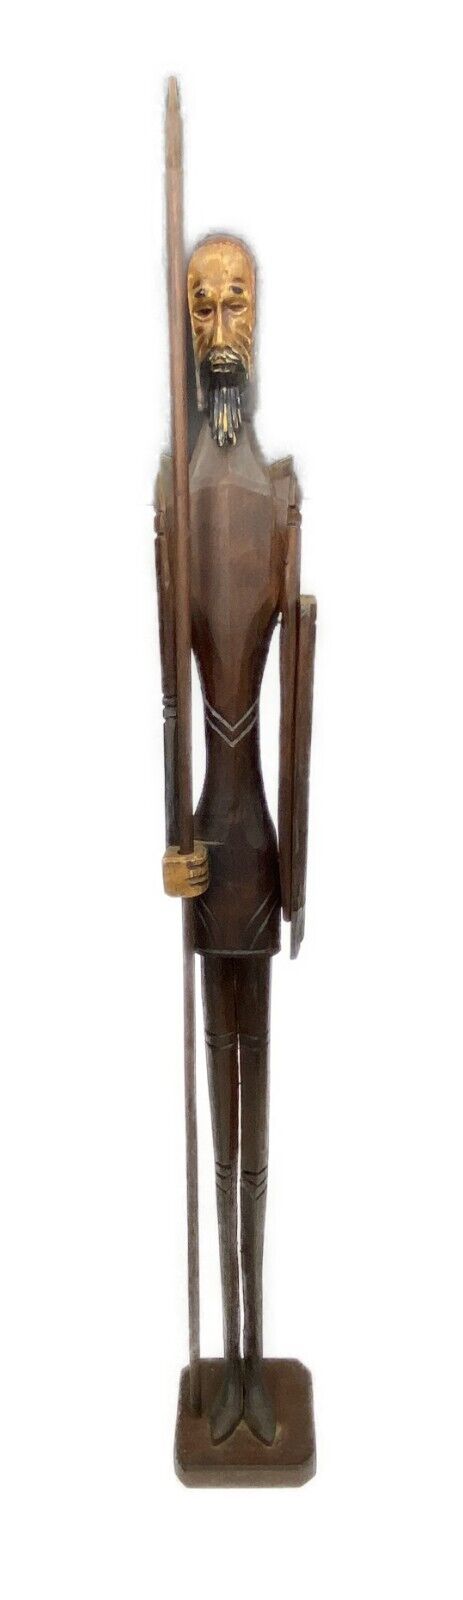 35” Don Quixote Carved Wood Watchman Guard Soldier Centurion Statue